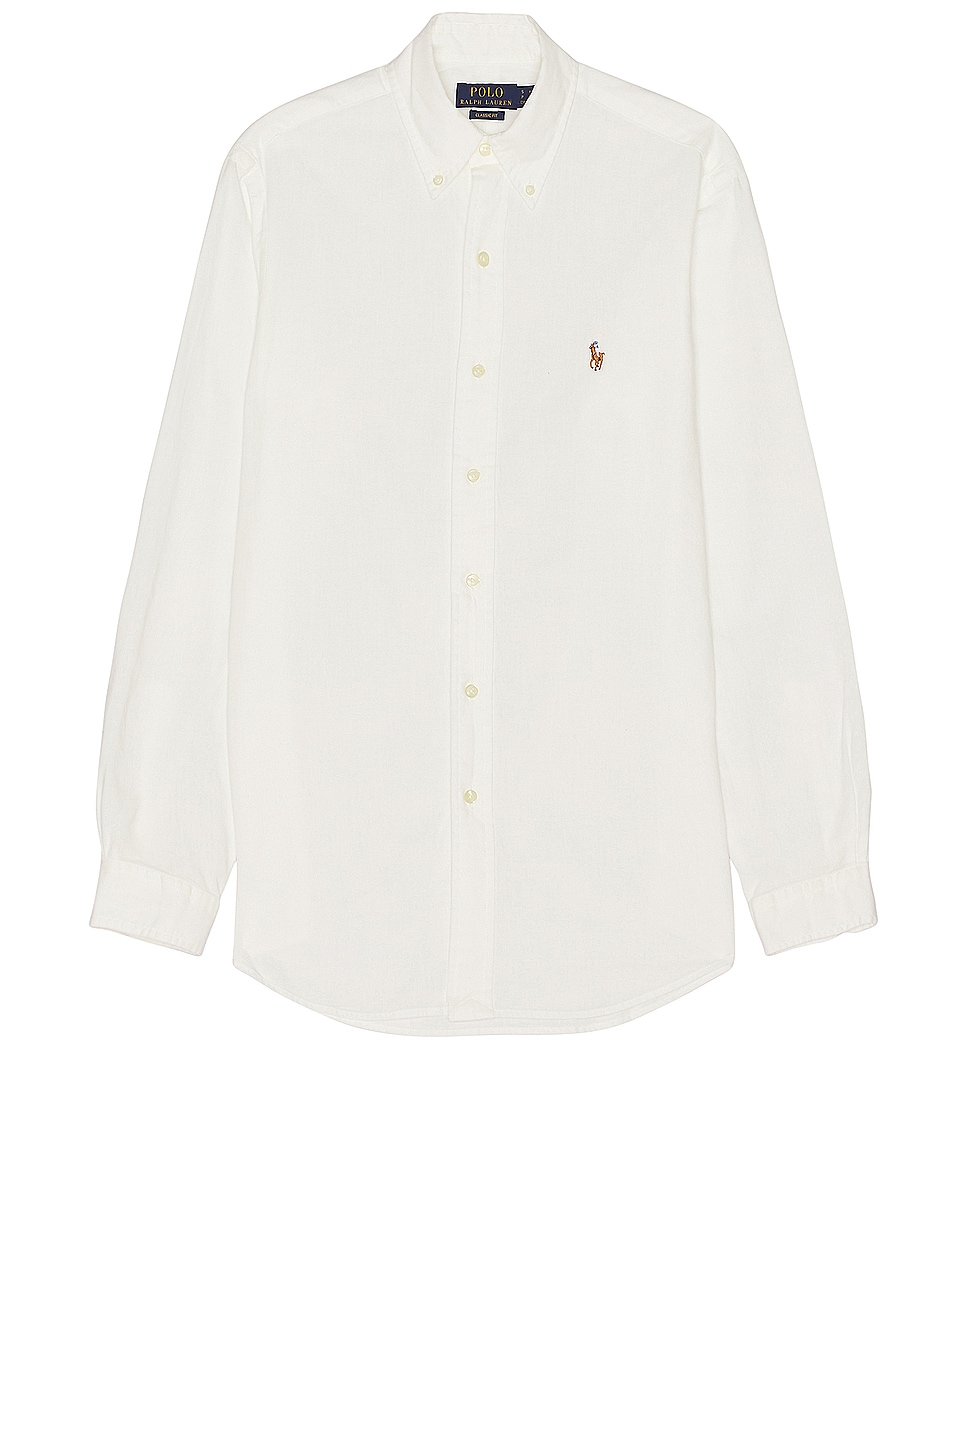 Image 1 of Polo Ralph Lauren Long Sleeve Chambray Shirt in White